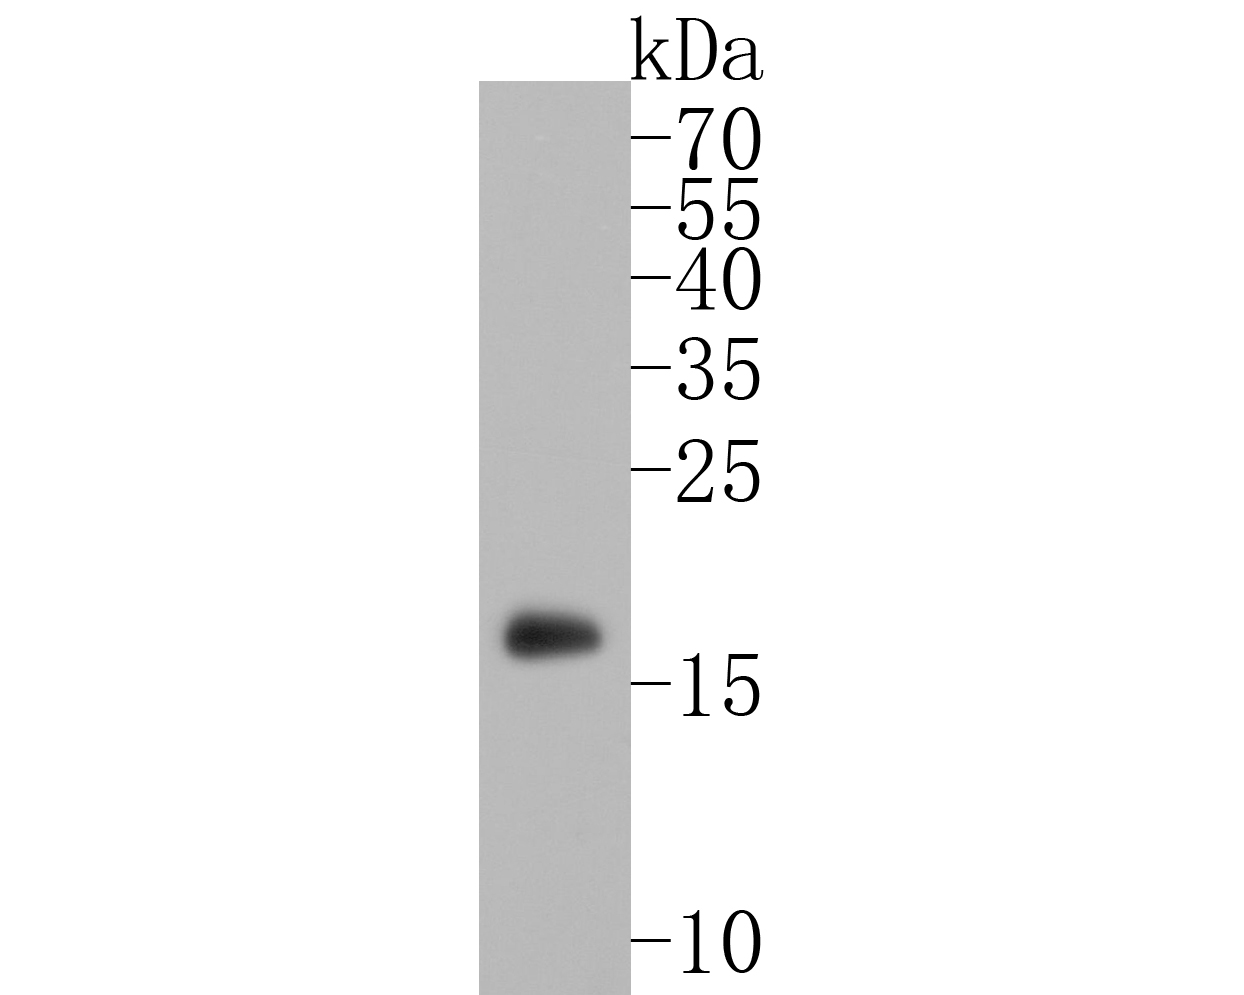 Western blot analysis of Alpha Synuclein on human brain tissue lysates. Proteins were transferred to a PVDF membrane and blocked with 5% BSA in PBS for 1 hour at room temperature. The primary antibody (ET7107-31, 1/500) was used in 5% BSA at room temperature for 2 hours. Goat Anti-Rabbit IgG - HRP Secondary Antibody (HA1001) at 1:5,000 dilution was used for 1 hour at room temperature.